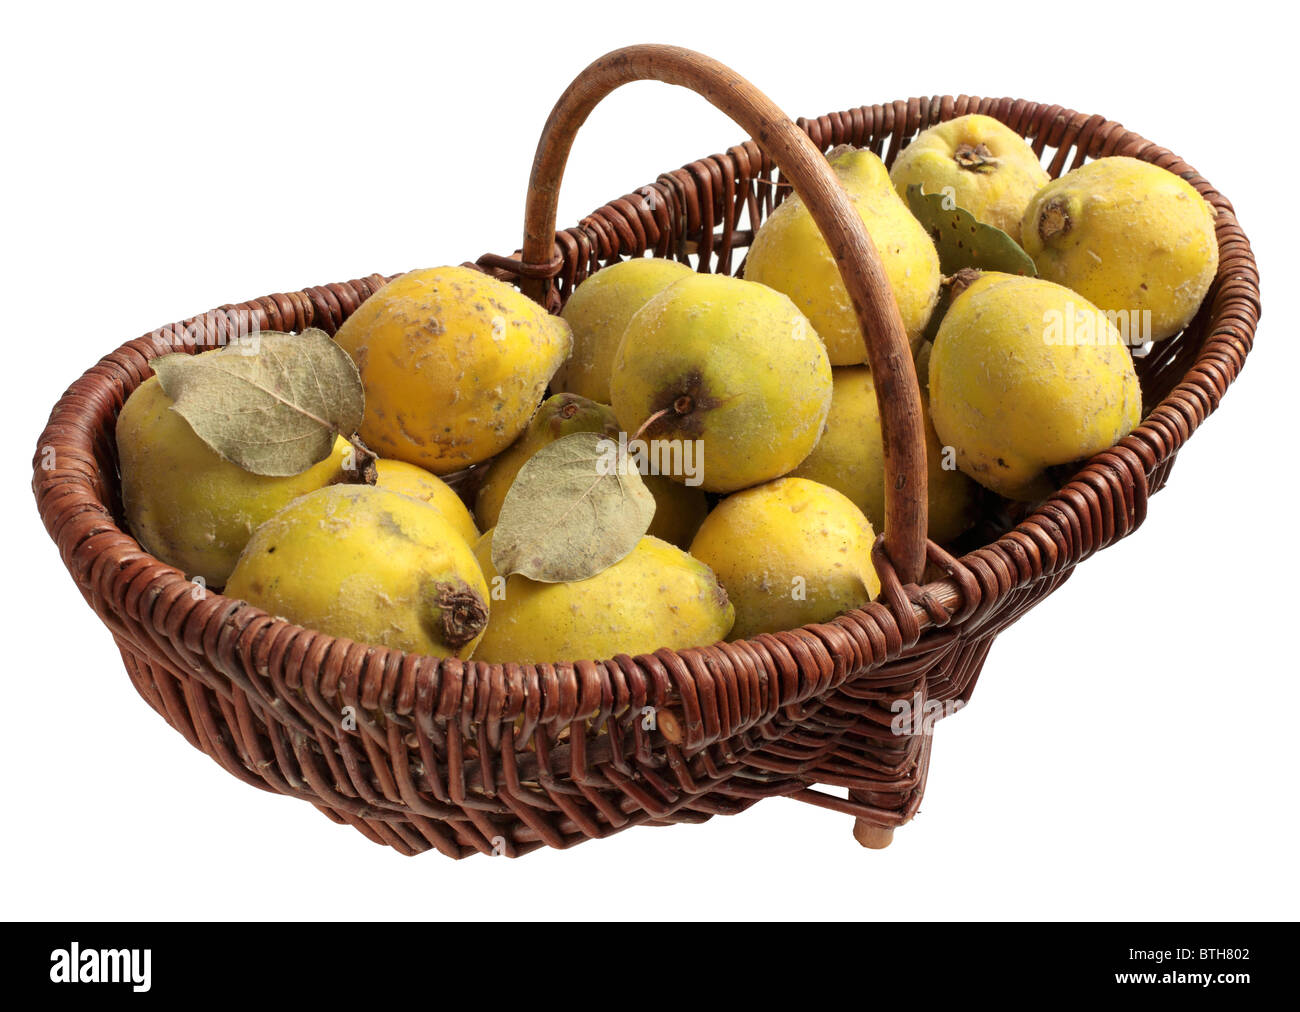 Quinces in a wicker basket Stock Photo